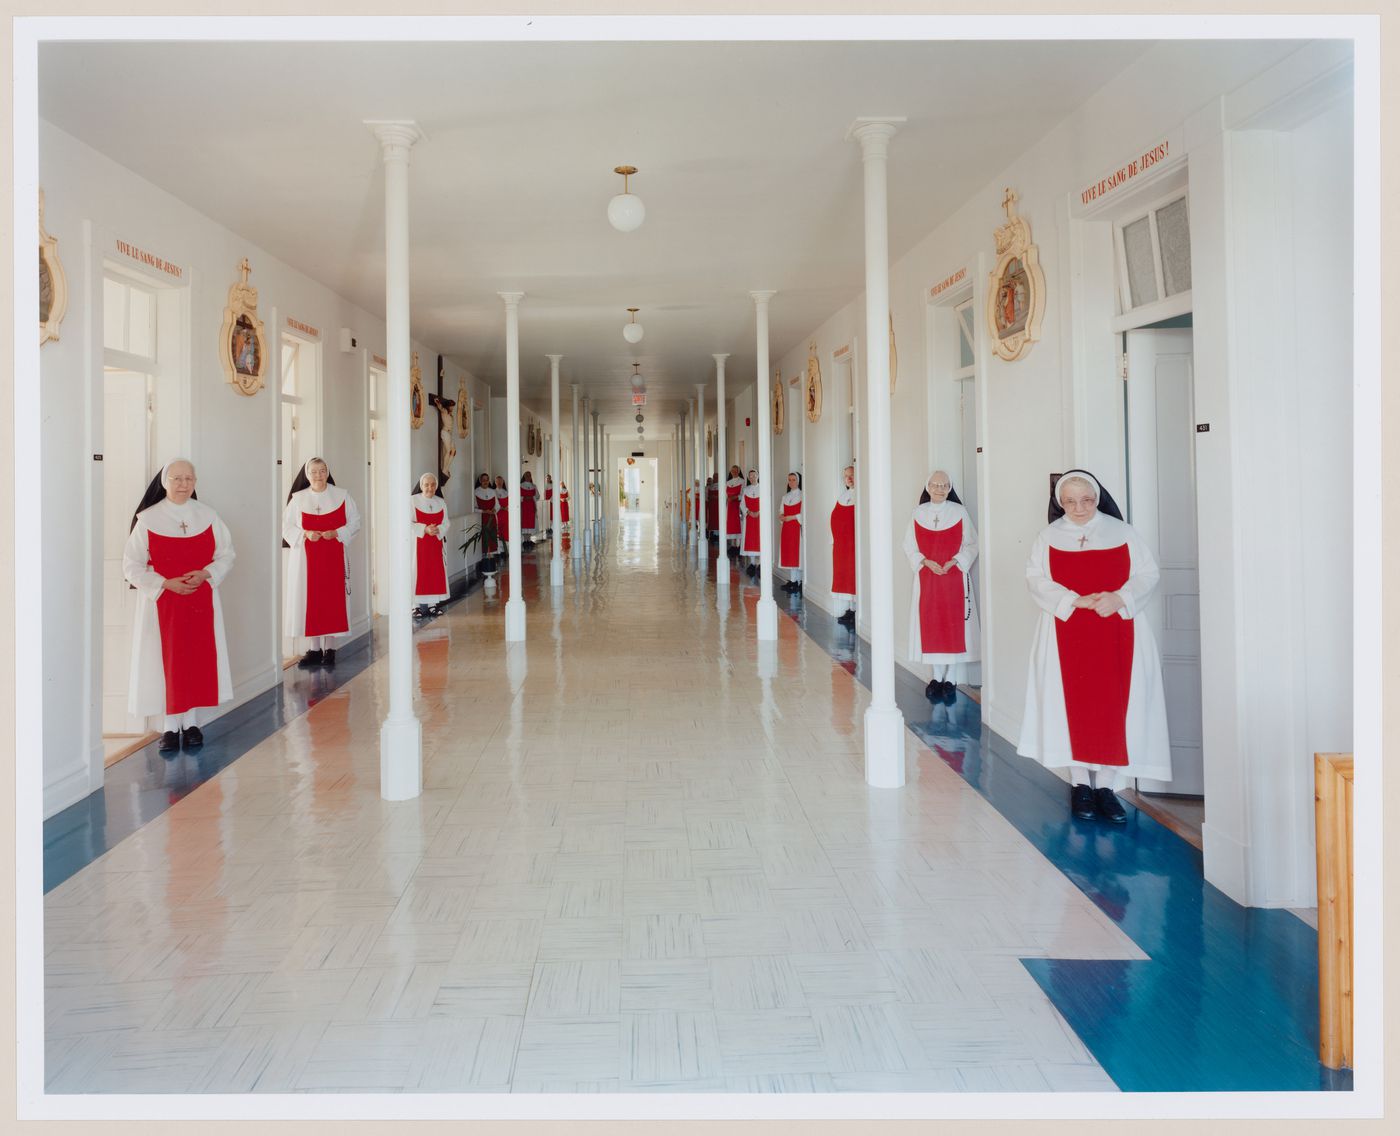 View of interior hallway of cells with the Soeurs Adoratrices du Précieux-Sang standing at doors, from the Convent Series, Nicolet, Québec, Canada